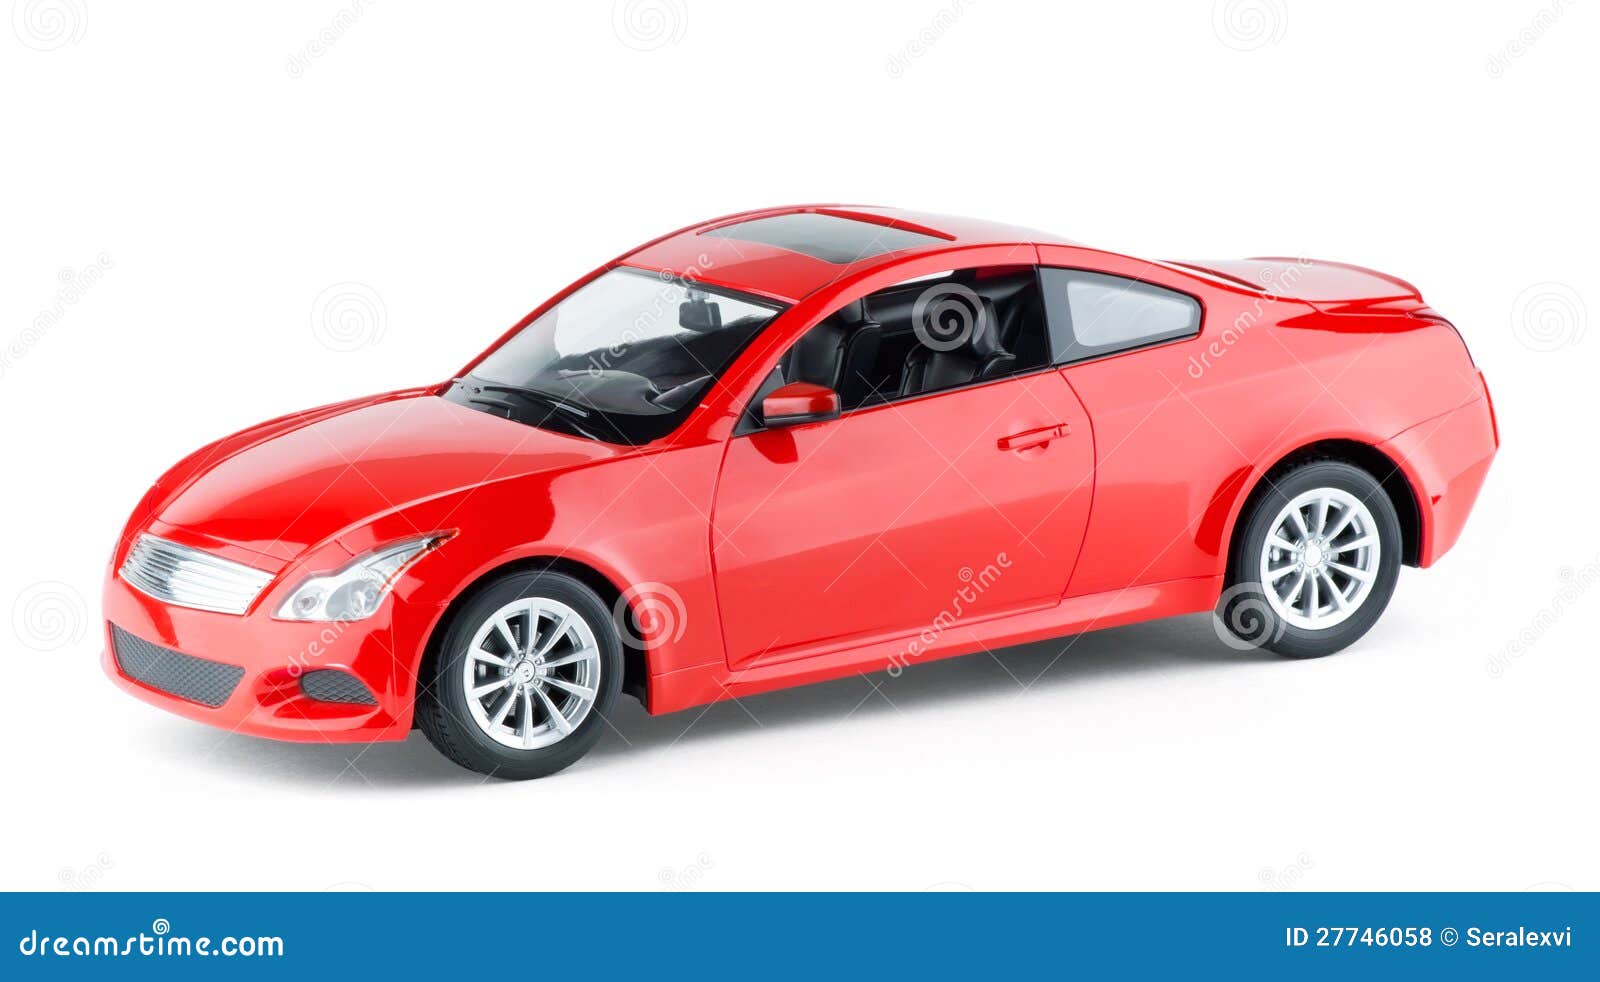 Red Toy Car Royalty Free Stock Photos  Image: 27746058